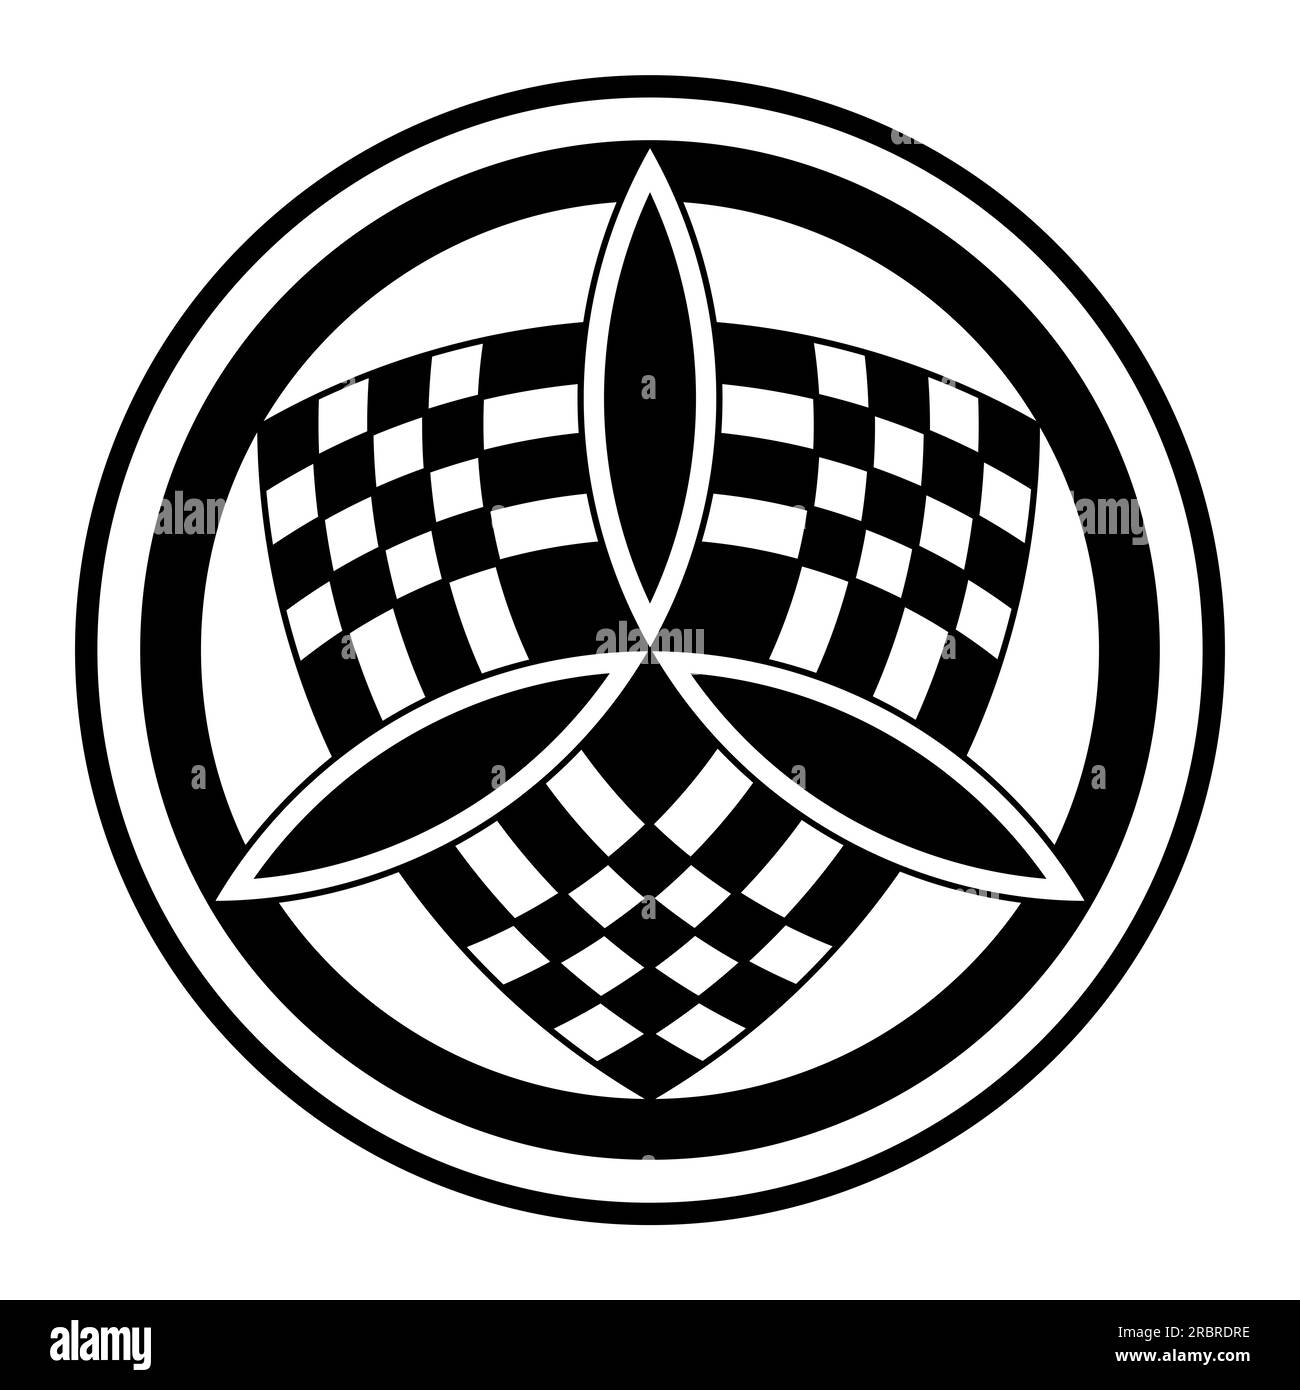 Trinity symbol over a checkered emblem within circles. Three vesica piscis lenses forming an equilateral triangle, over a shield. Stock Photo